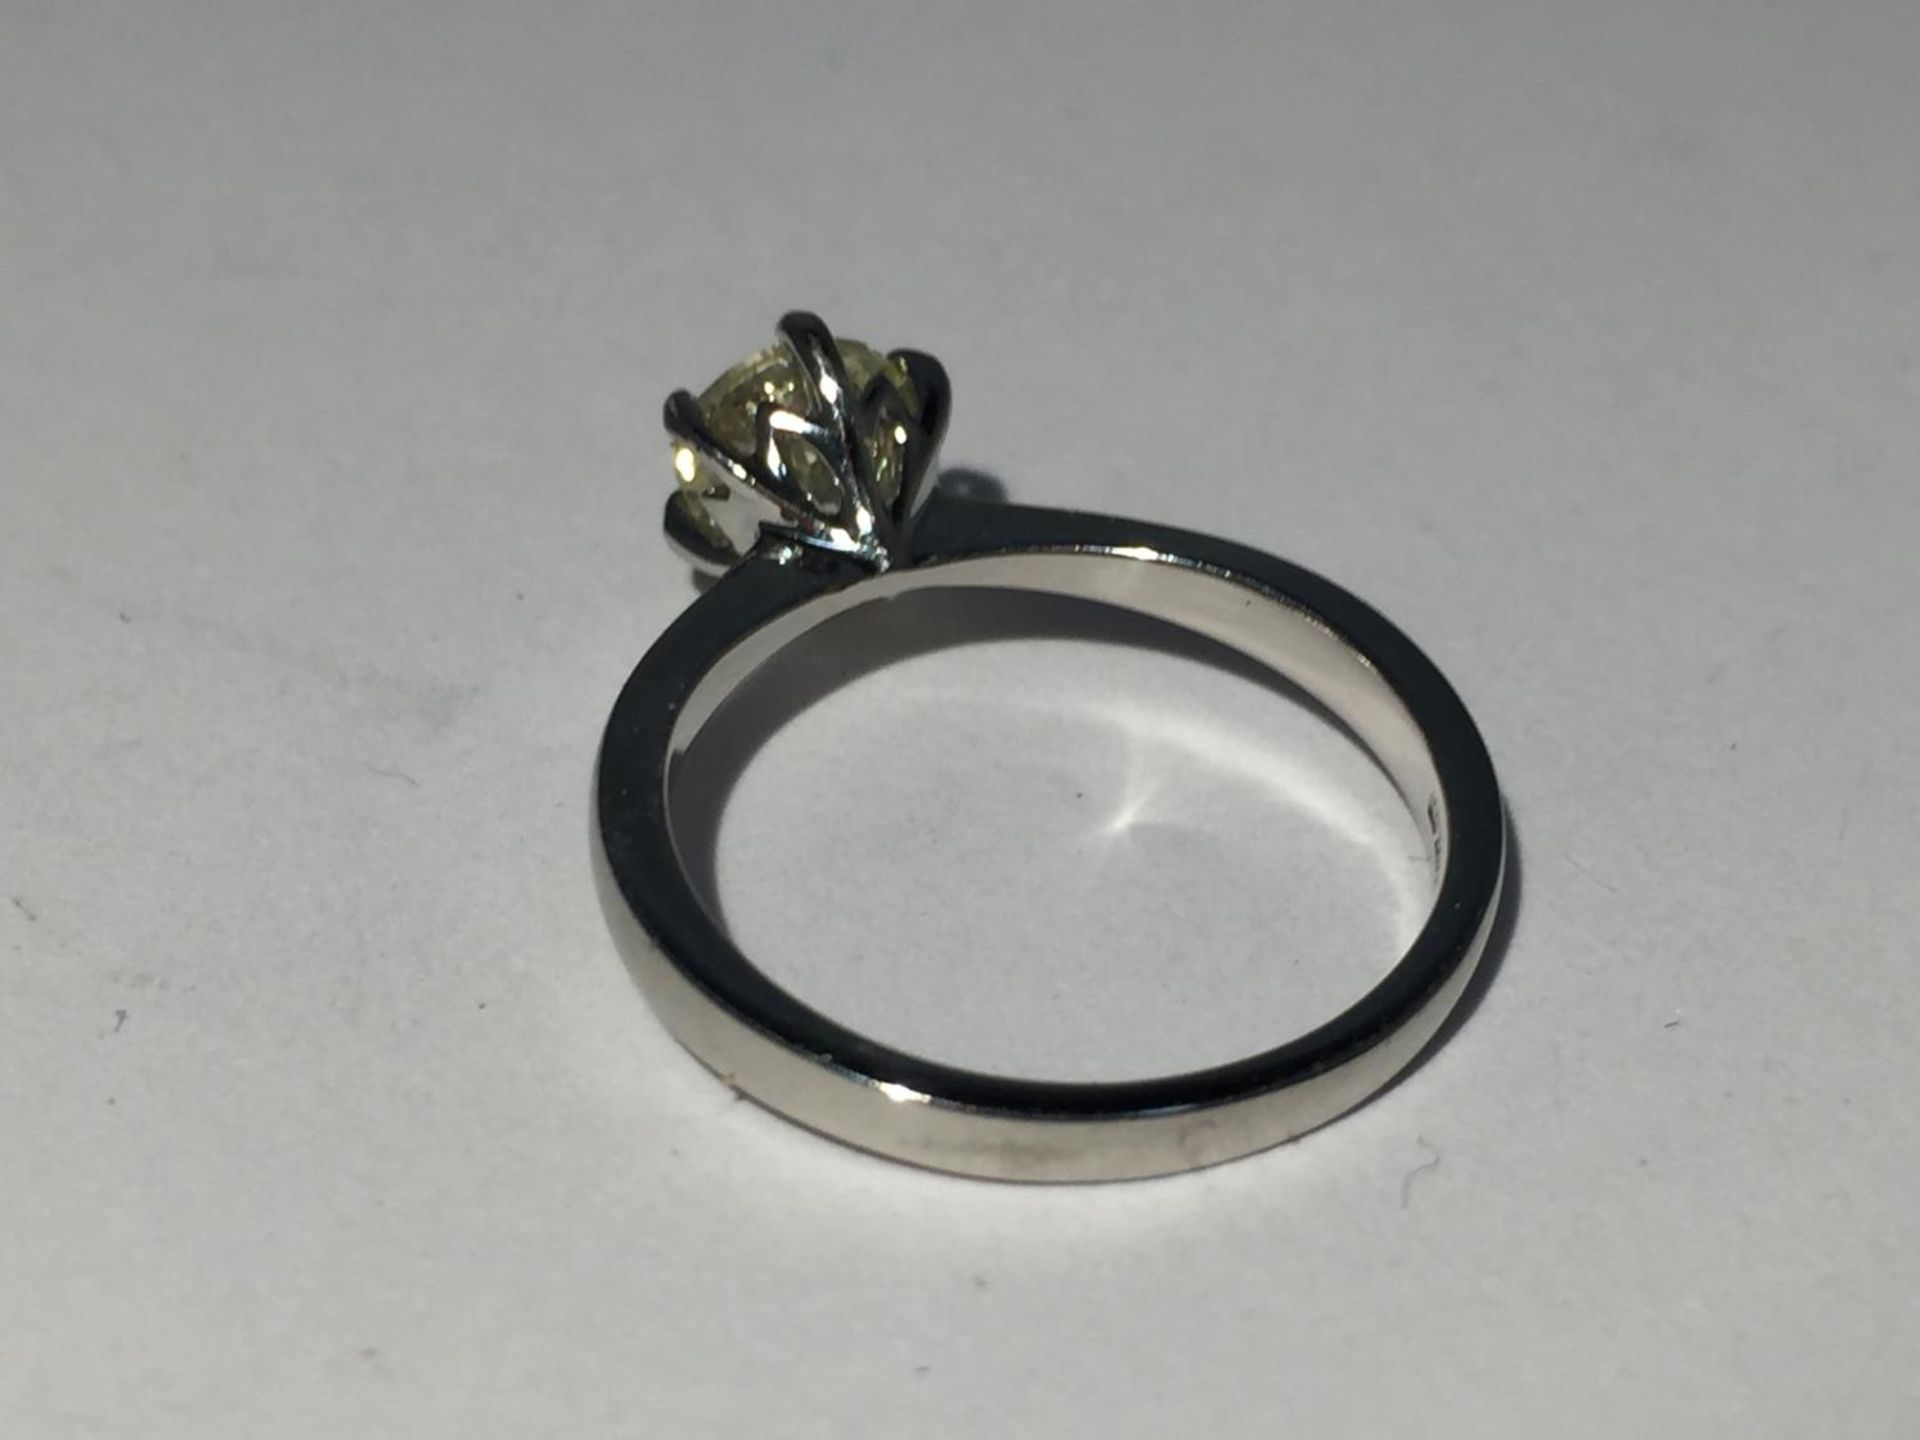 A PLATINIUM RING WITH A DIAMOND SOLITAIRE I CARAT SI1 K COLOUR SIZE M/N IN A PRESENTATION BOX - Image 5 of 7